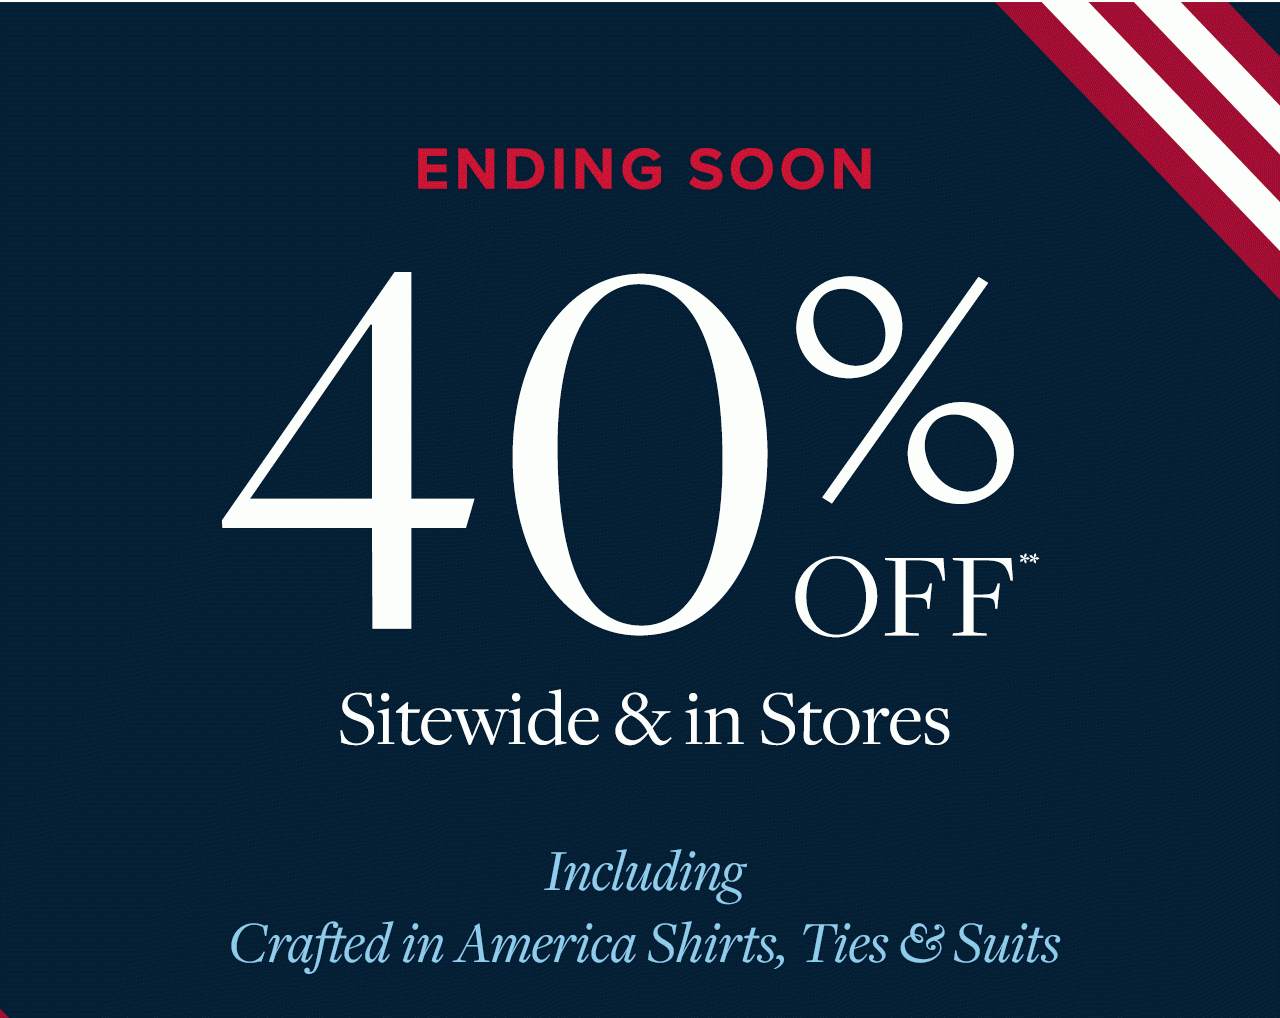 Ending Soon 40% Off Sitewide and in Stores Including Crafted in America Shirts, Ties and Suits